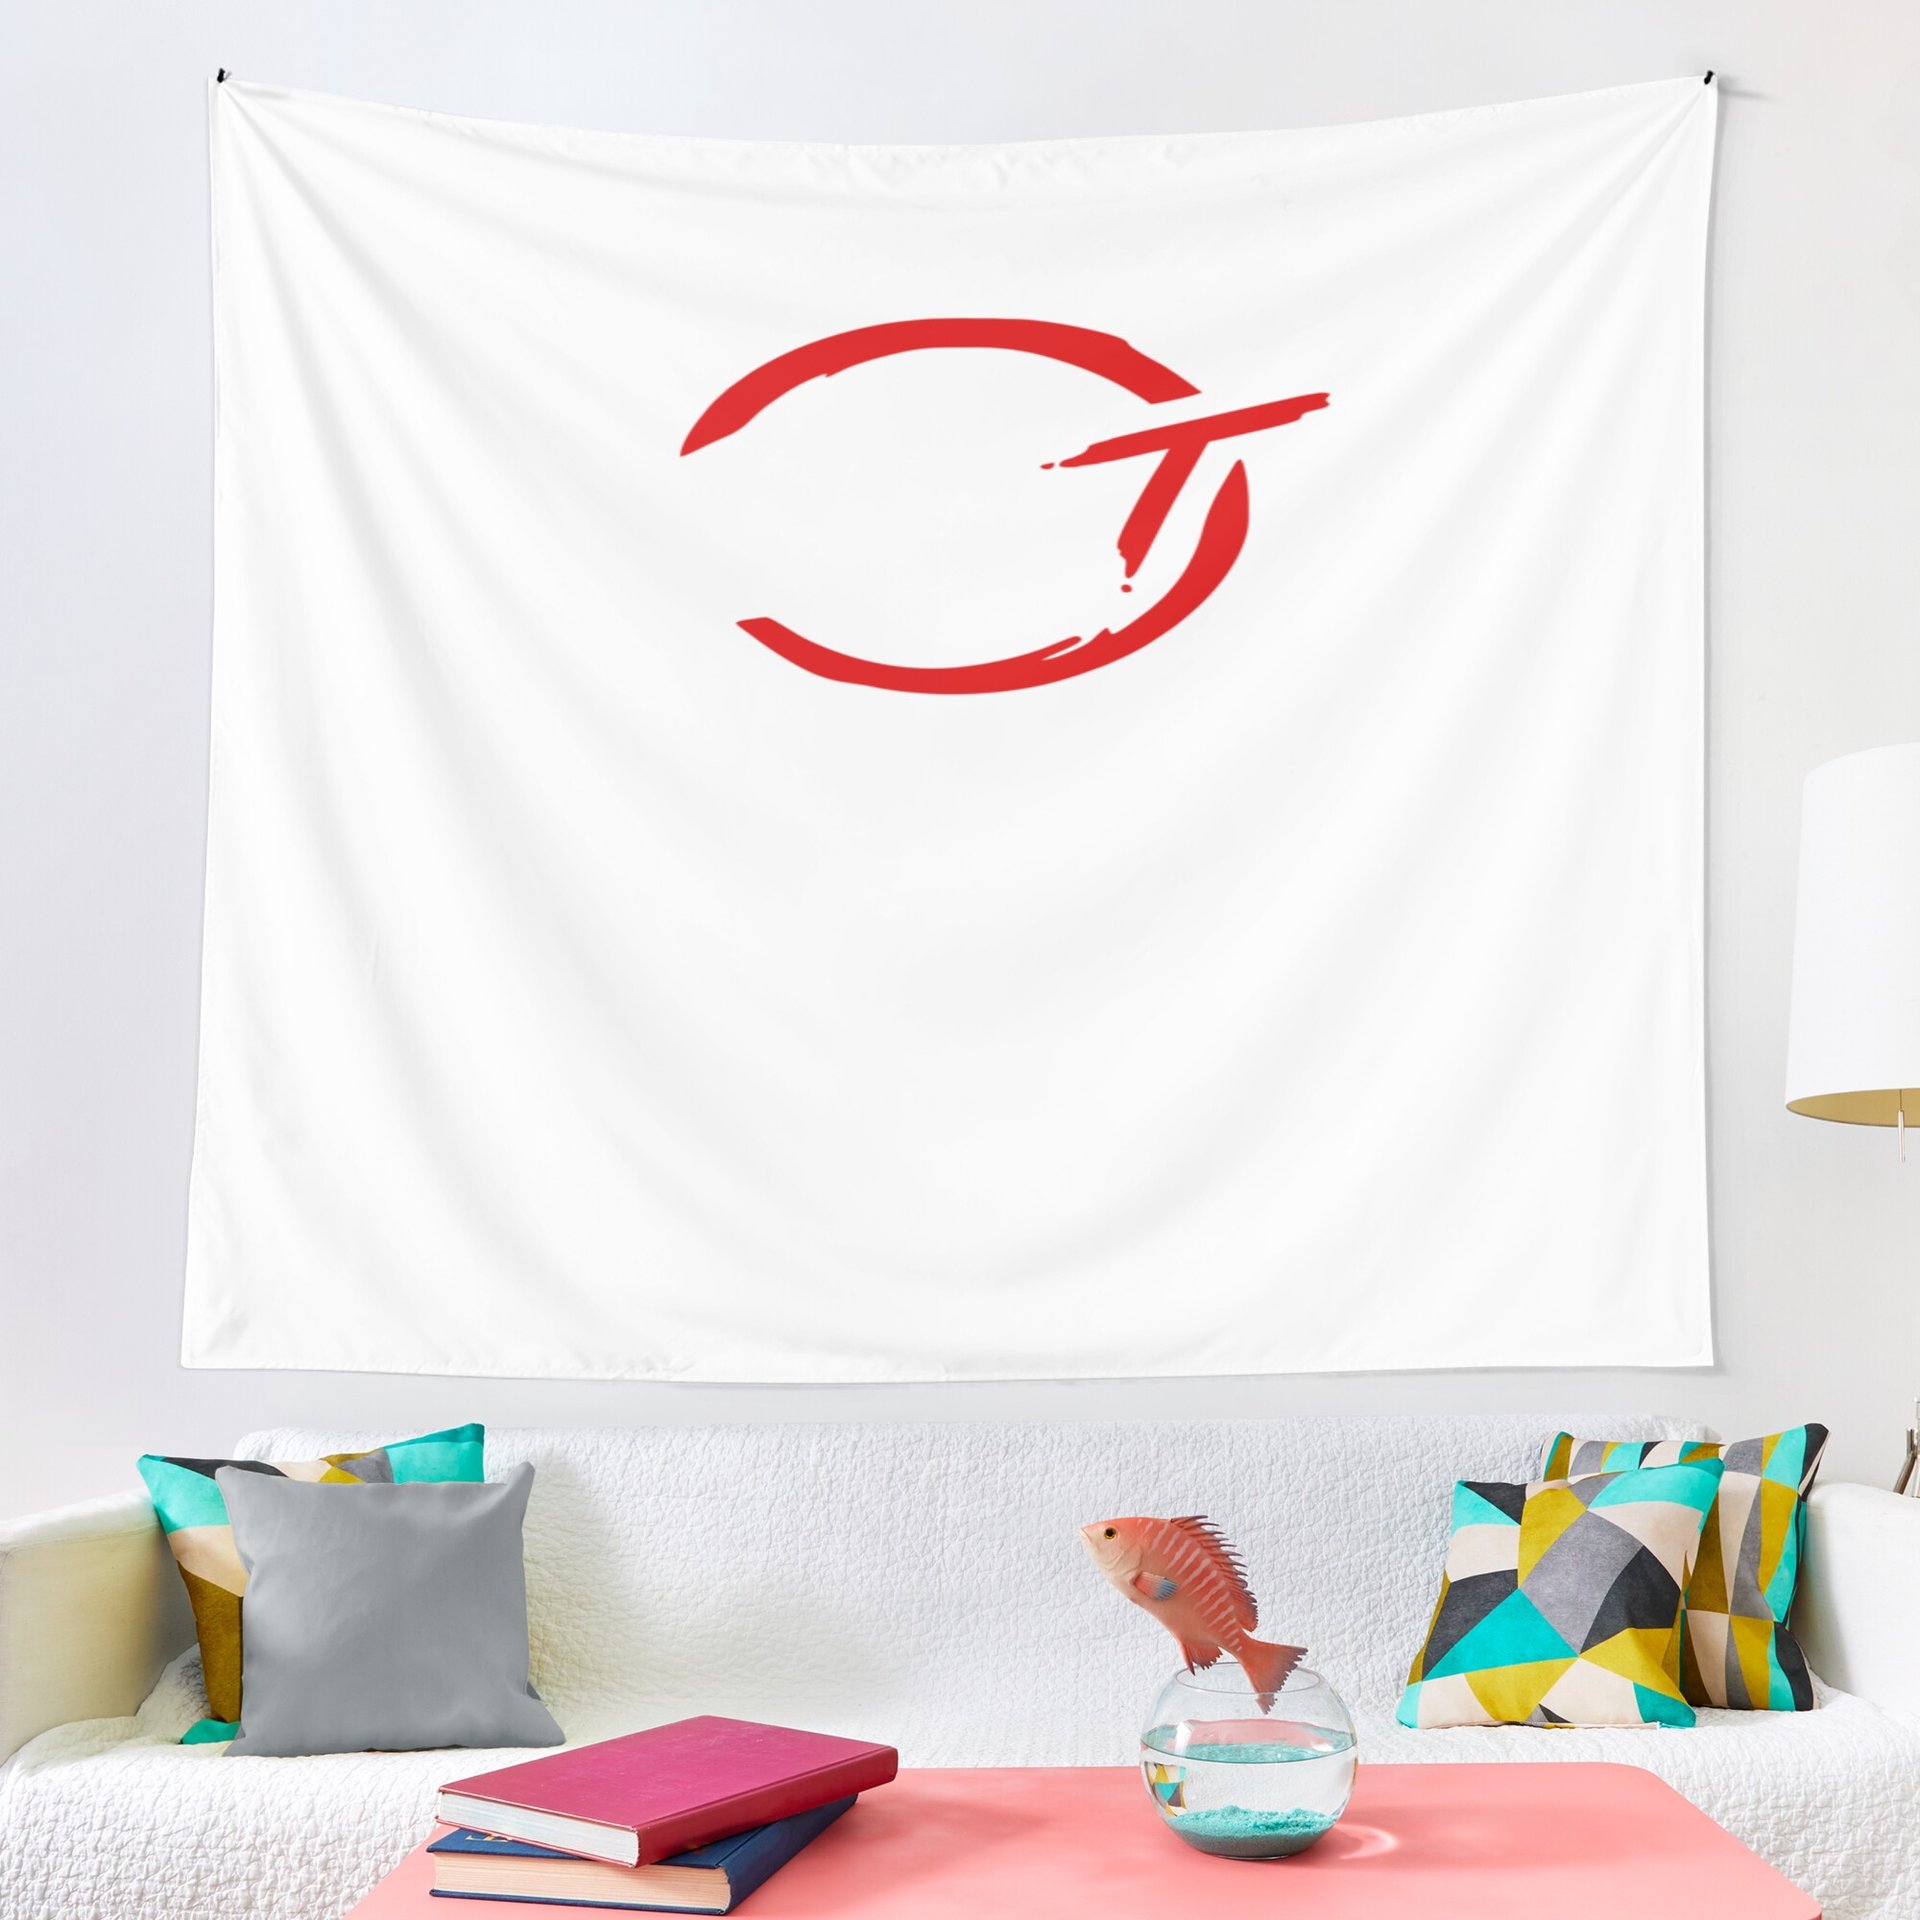 urtapestry lifestyle largesquare2000x2000 6 - 100 Thieves Shop